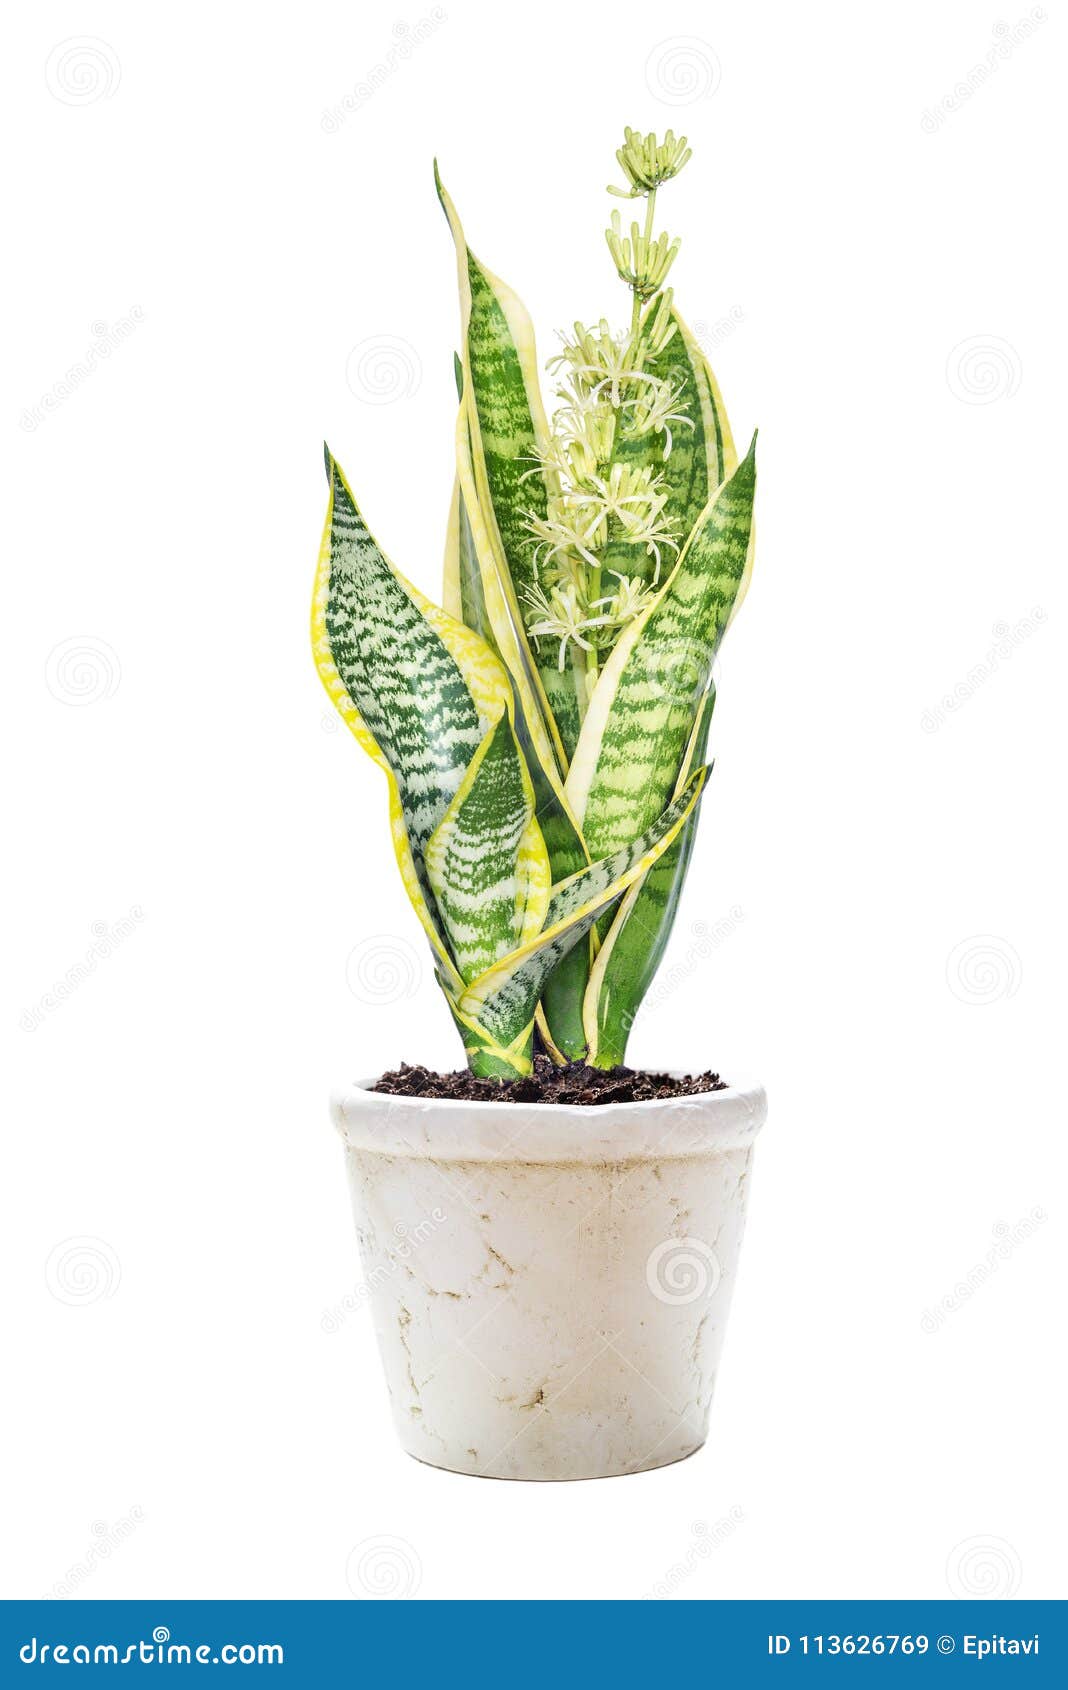 Blooming Sansevieria on a White Background Stock Image - Image of clay